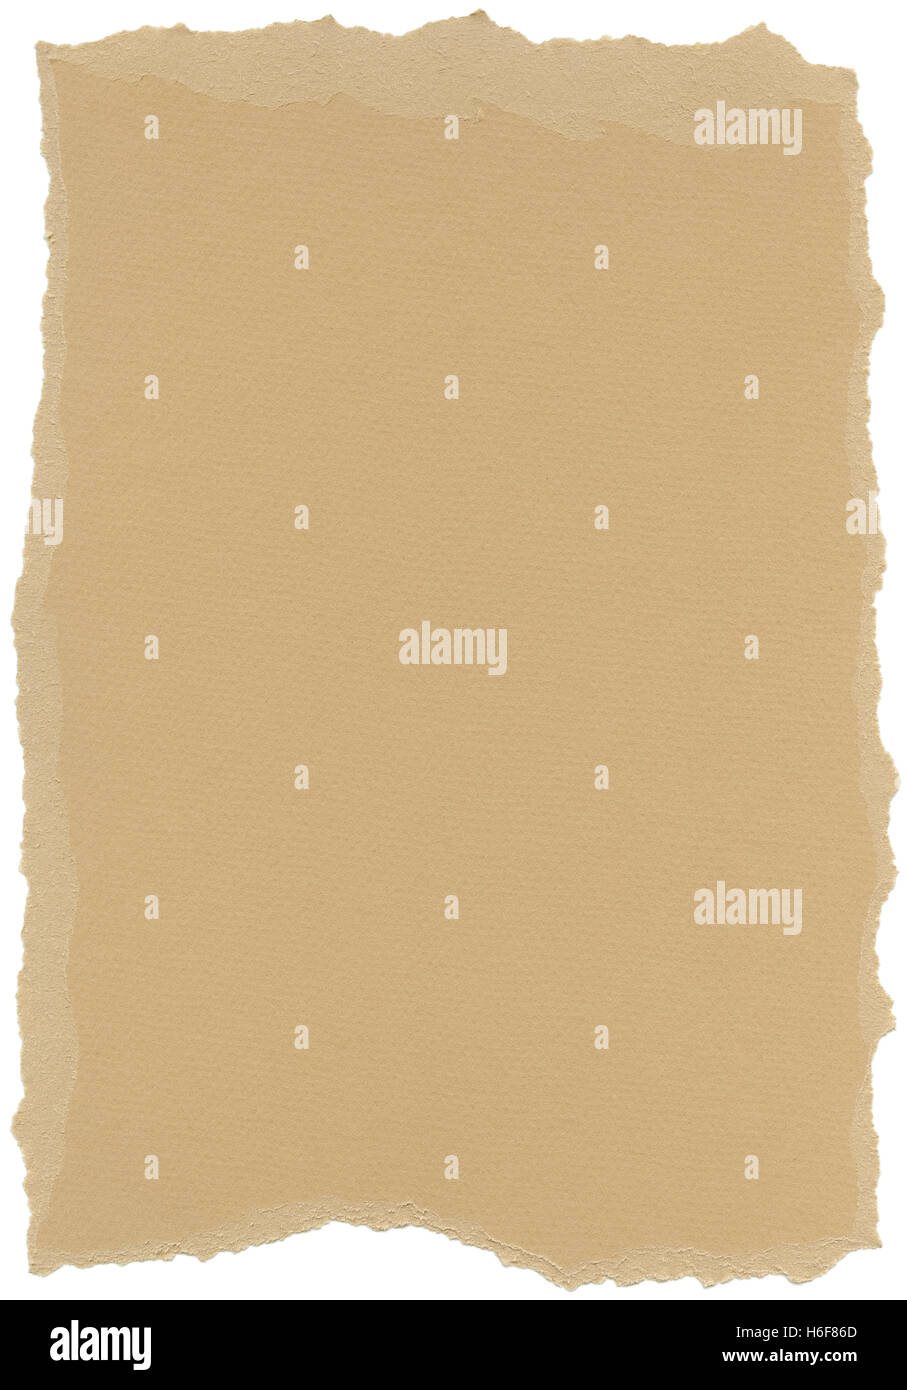 Texture of beige fiber paper with torn edges. Isolated on white background. Scanned at 1200dpi using a professional scanner. Stock Photo